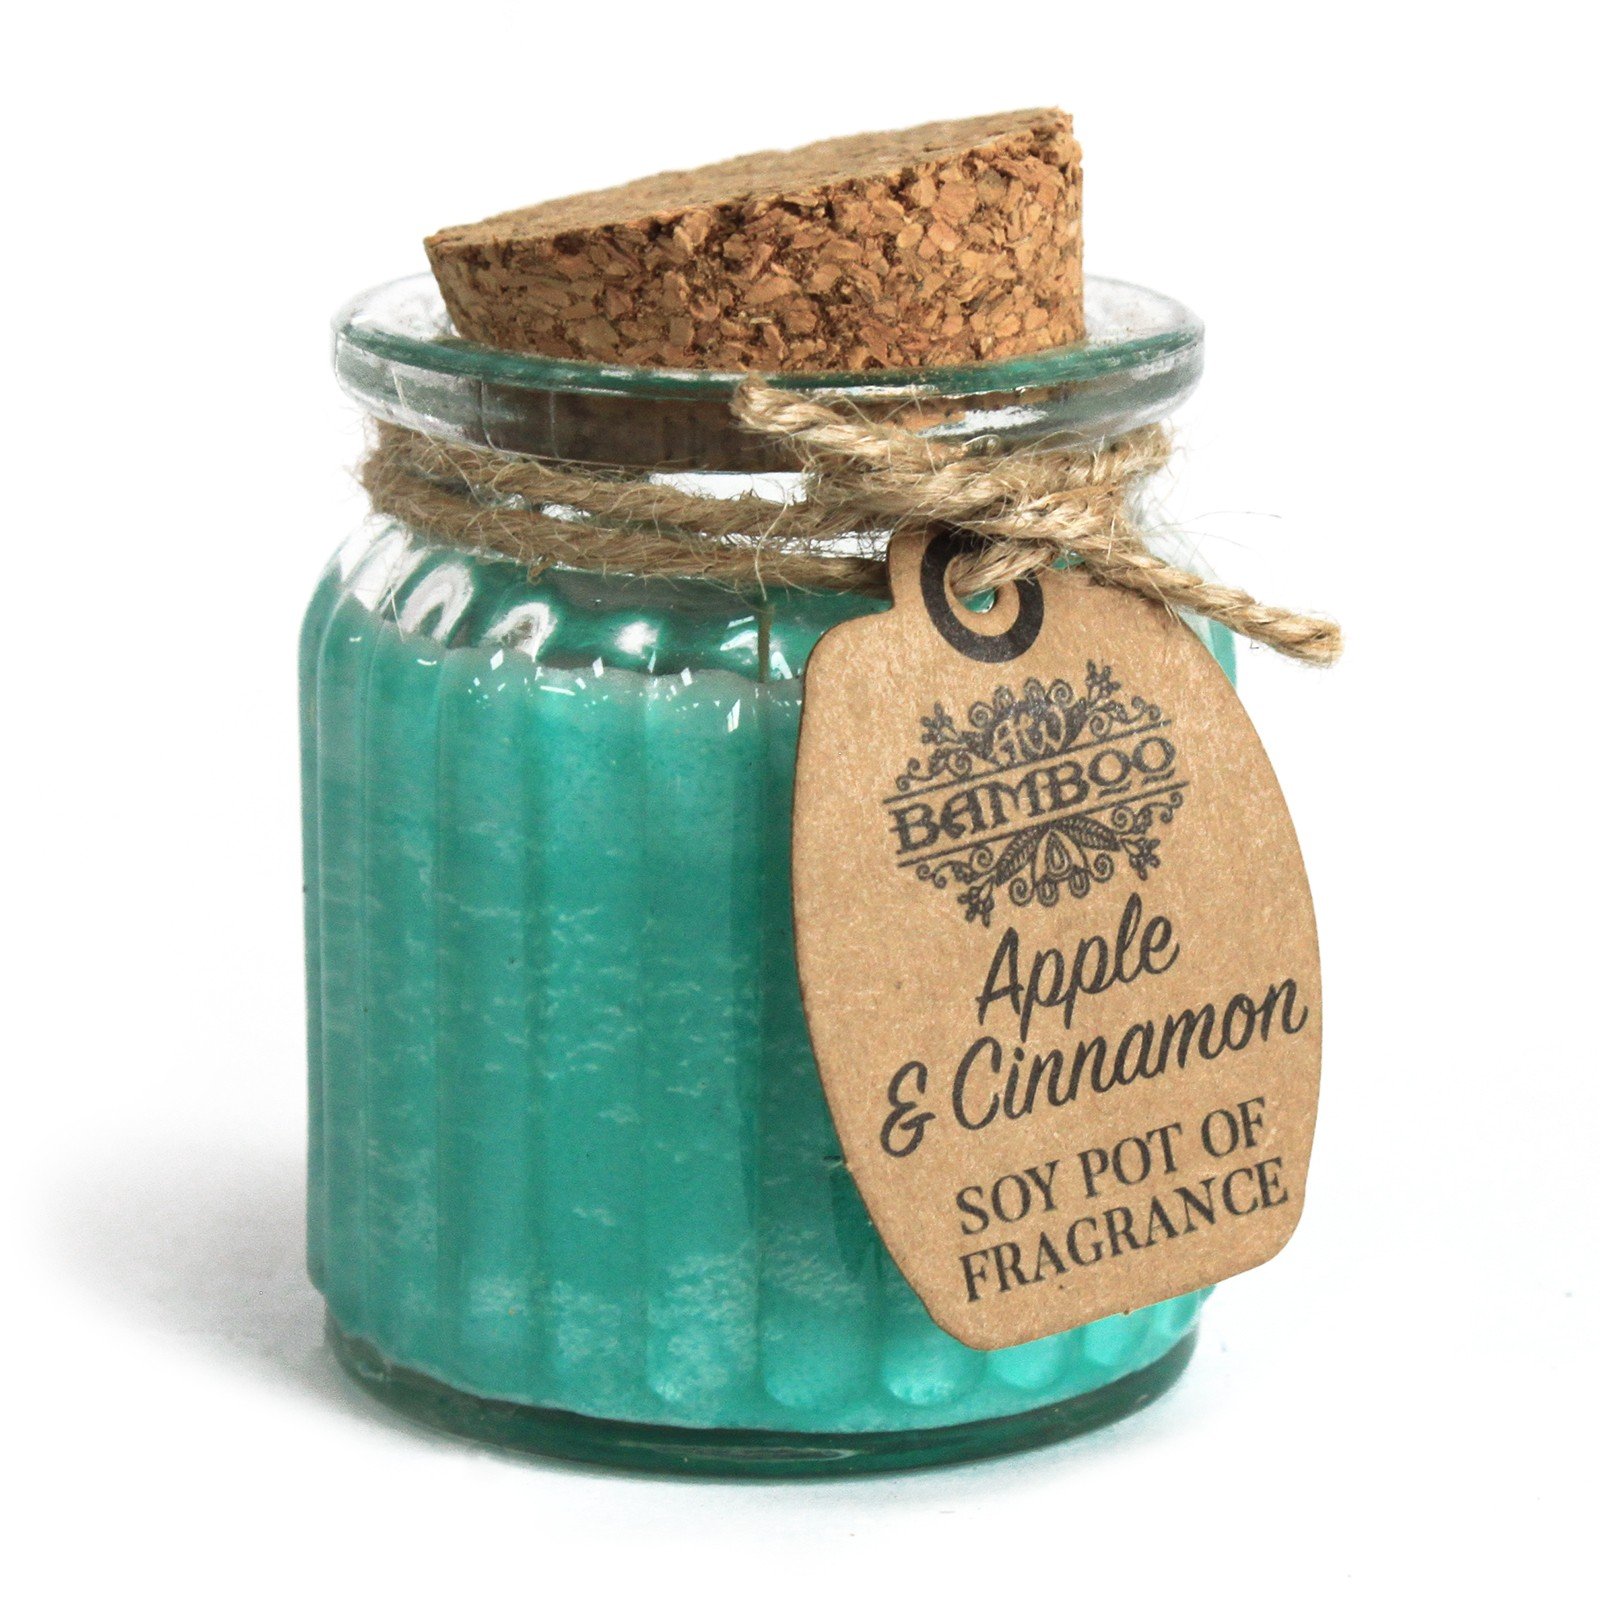 Apple & Cinnamon Soy Pot of Fragrance Candles